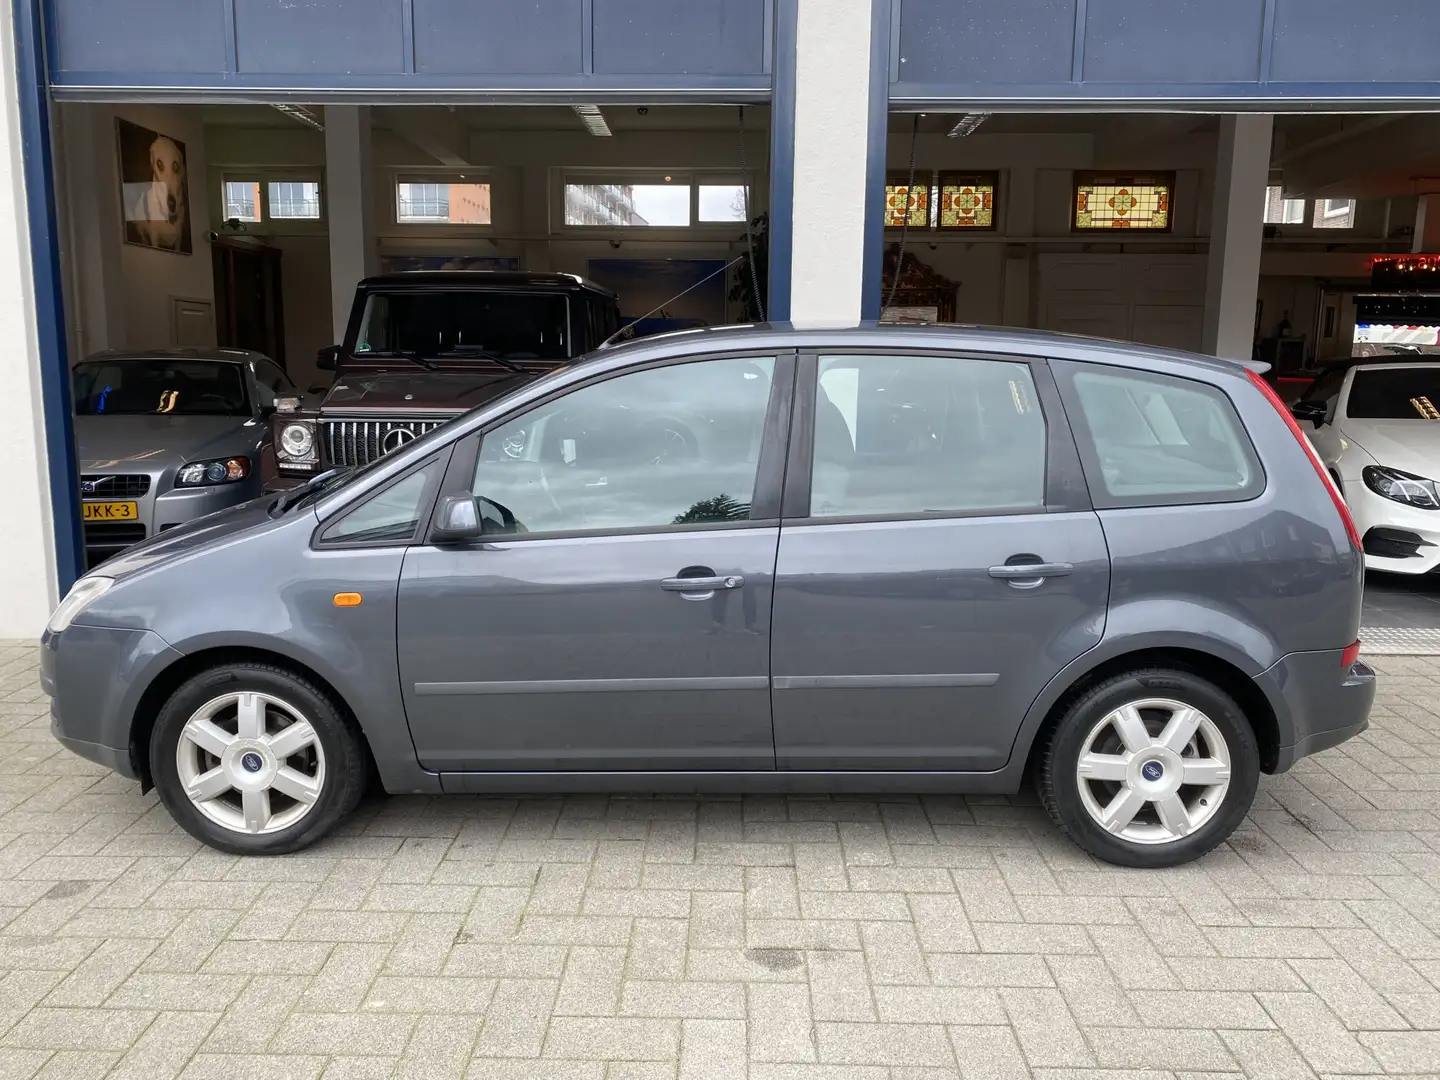 Ford Focus C-Max 1.6-16V Futura NL AUTO/AIRCO/CRUISE/NETTE STAAT Grey - 2